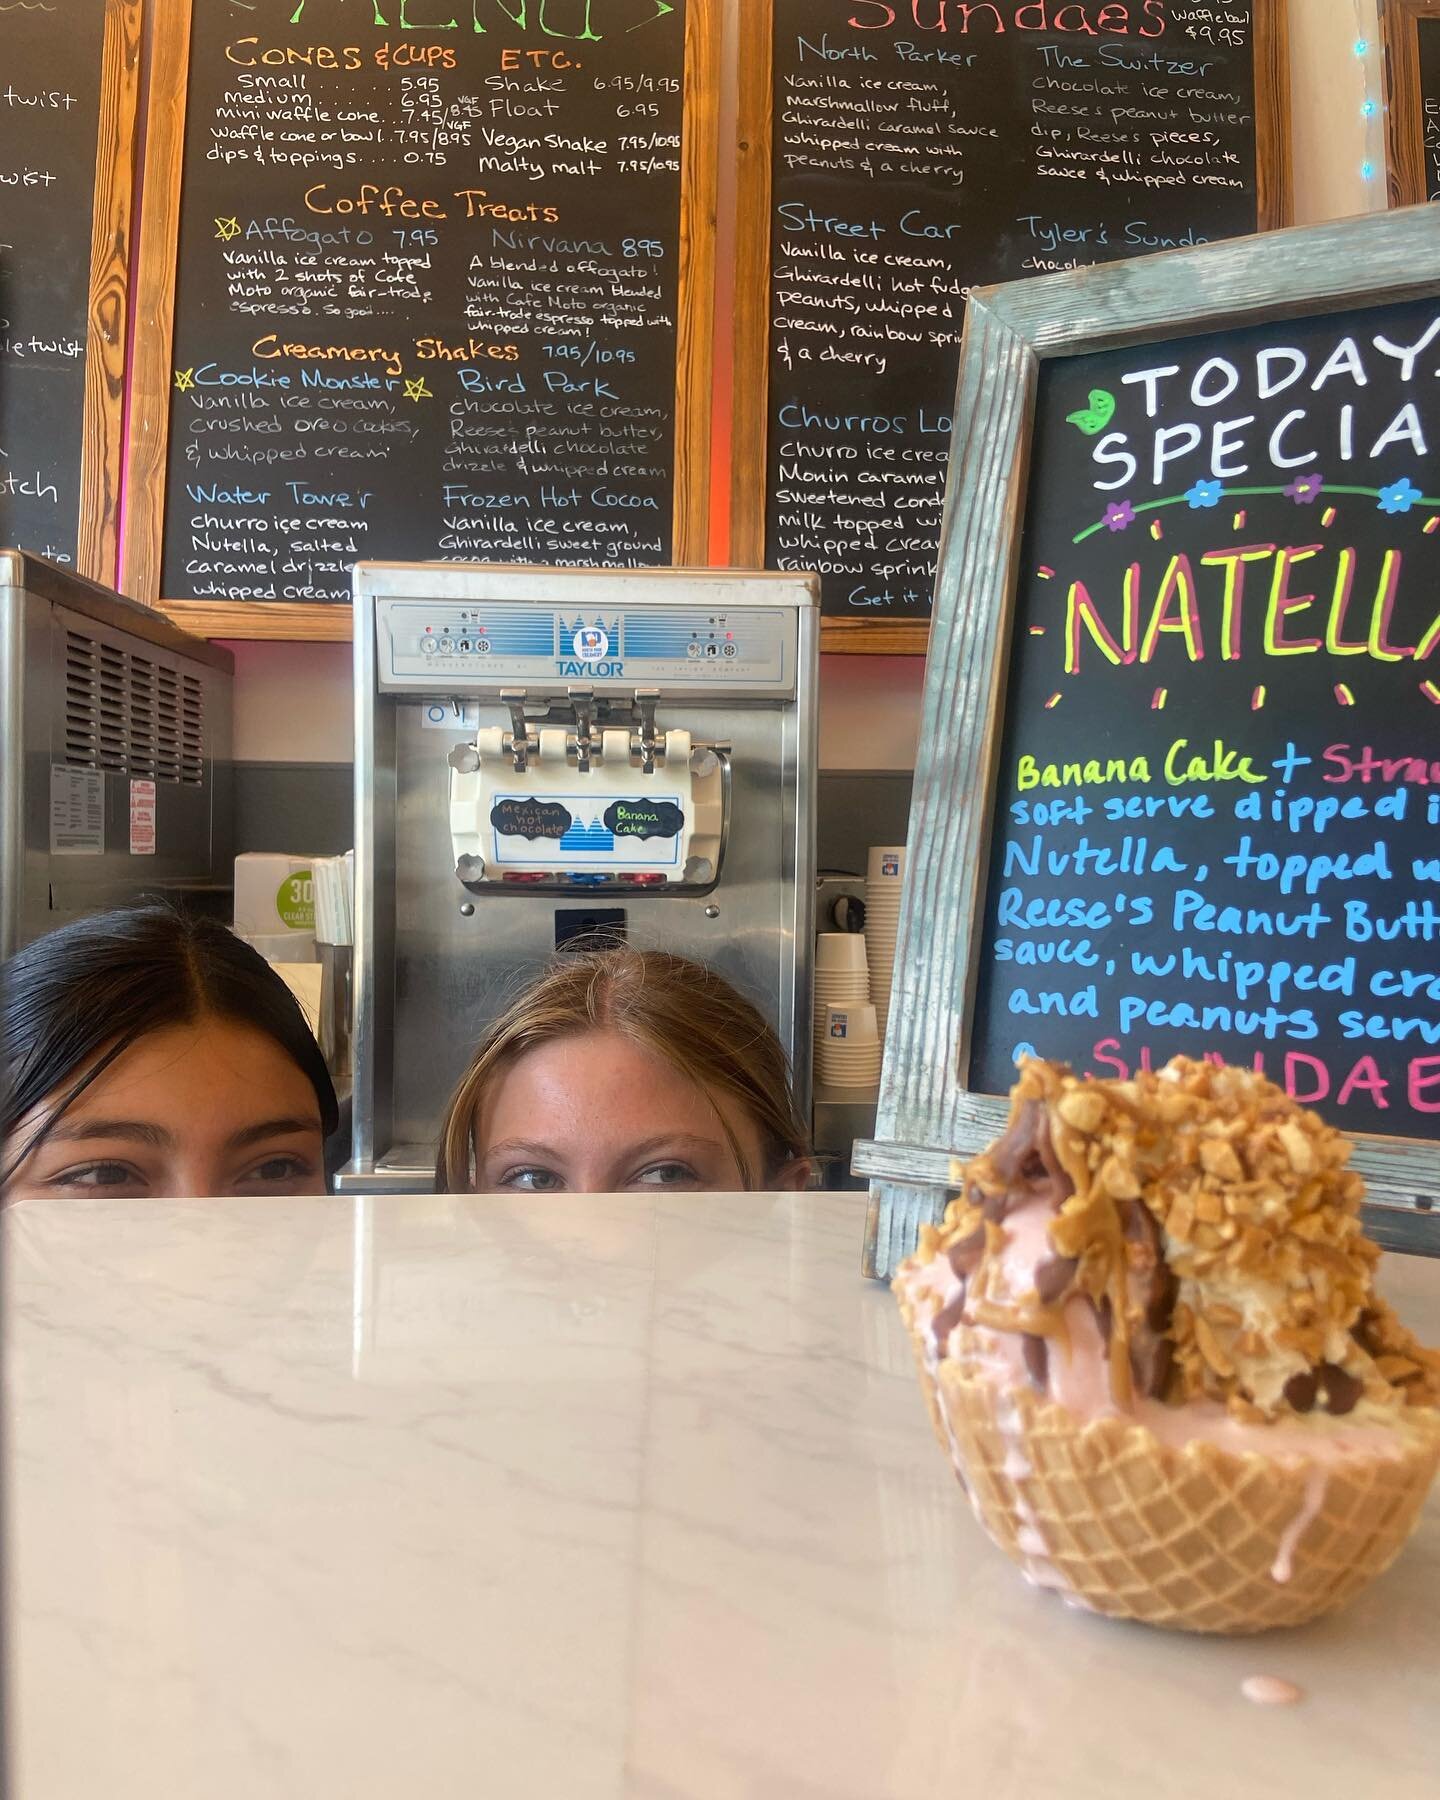 New special alert 🚨 🔔 Natella sundae: Banana cake 🍰 and strawberry 🍓 with Nutella sauce, peanut butter sauce, whipped cream and peanuts 🥜. Come in and try this absolutely scrumptious sundae while it&rsquo;s still available👍🏼🤤🔥. #yumzy 

#ice